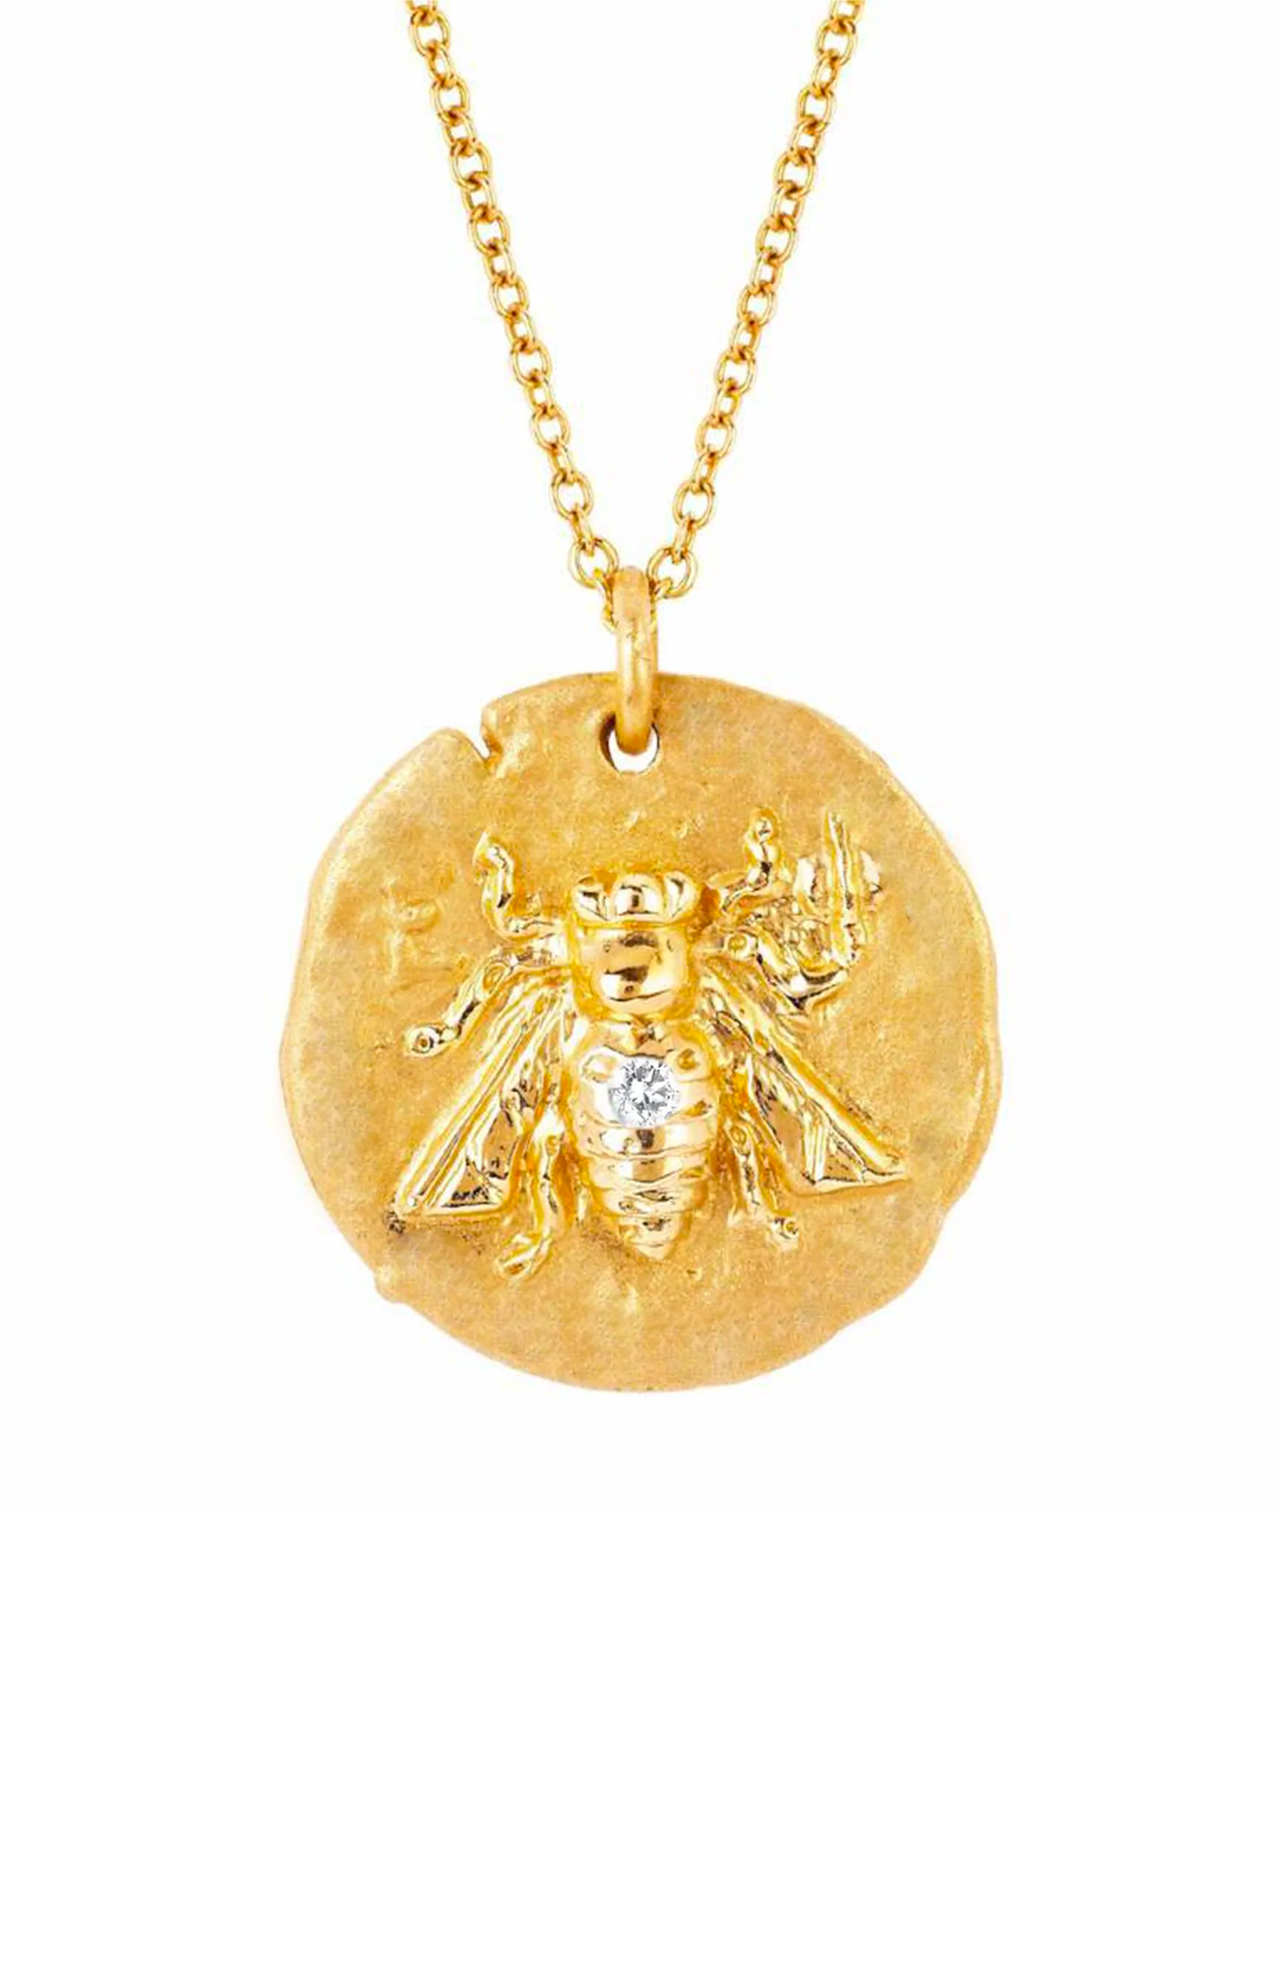 Sacred Honey Bee Coin Necklace with Single Diamond (6978996699251)